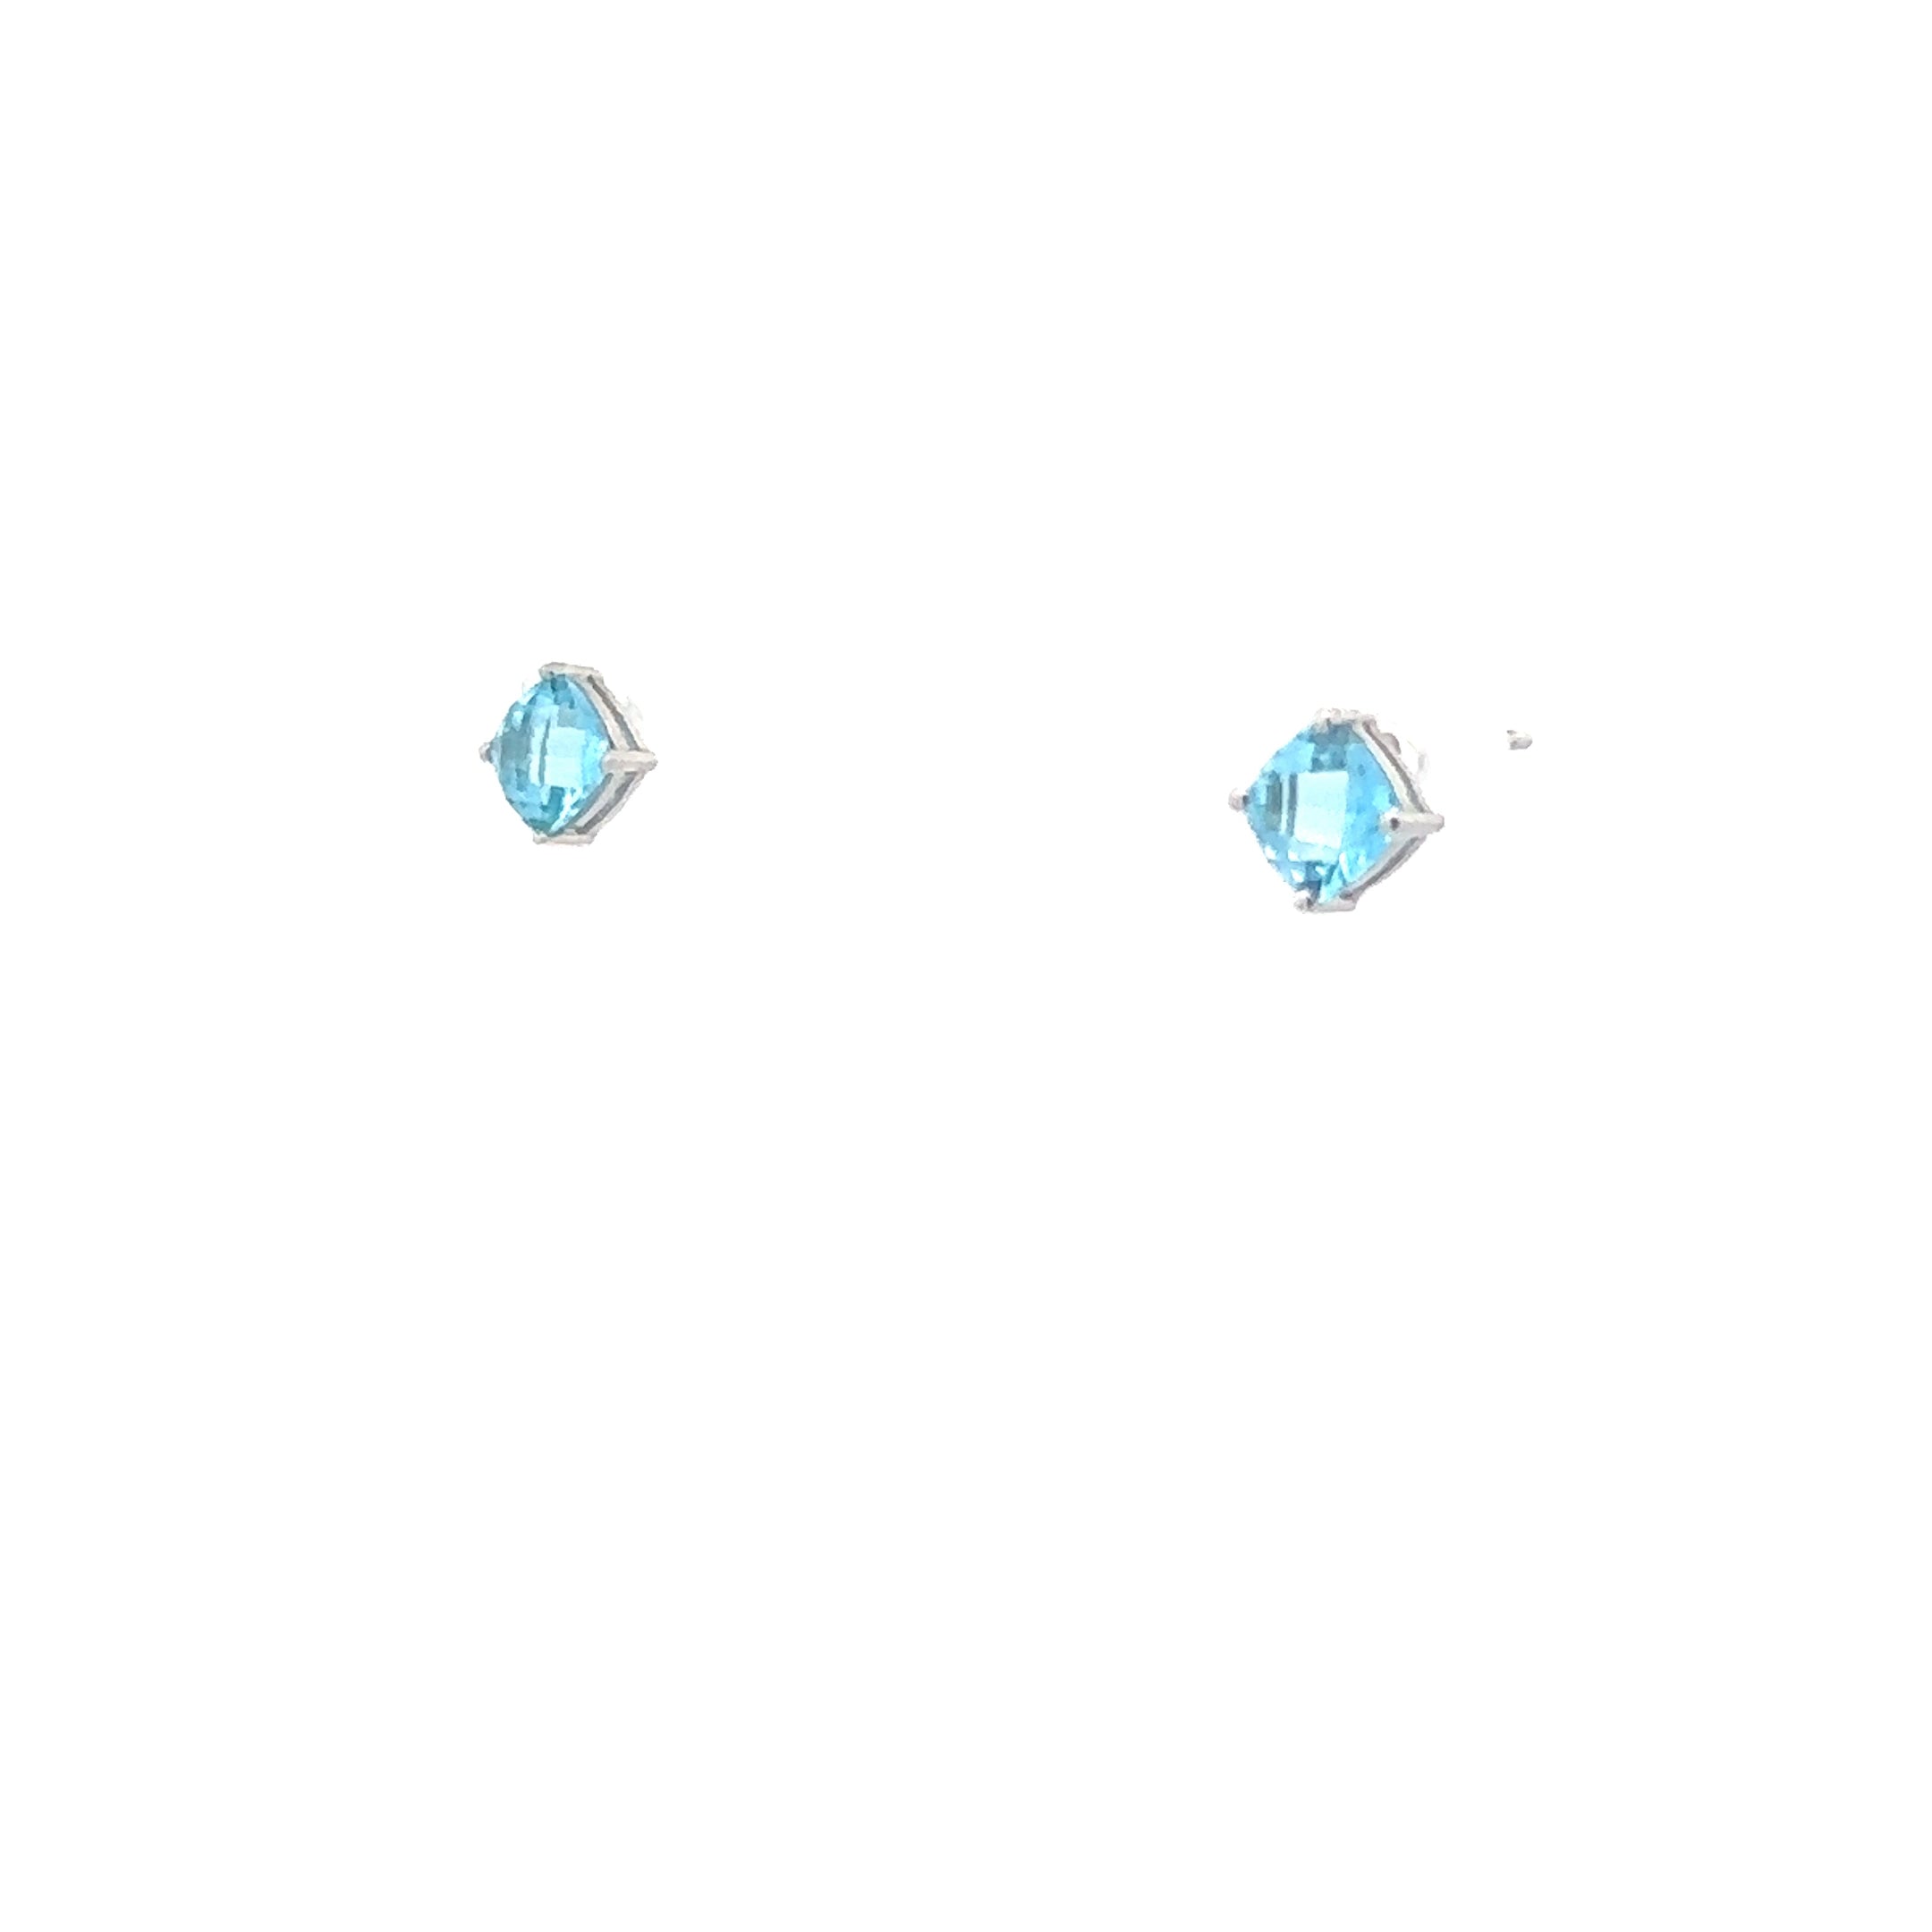 Estate Collection: 14K White Gold Checkerboard Cushion-Cut Swiss Blue Topaz Stud Earrings